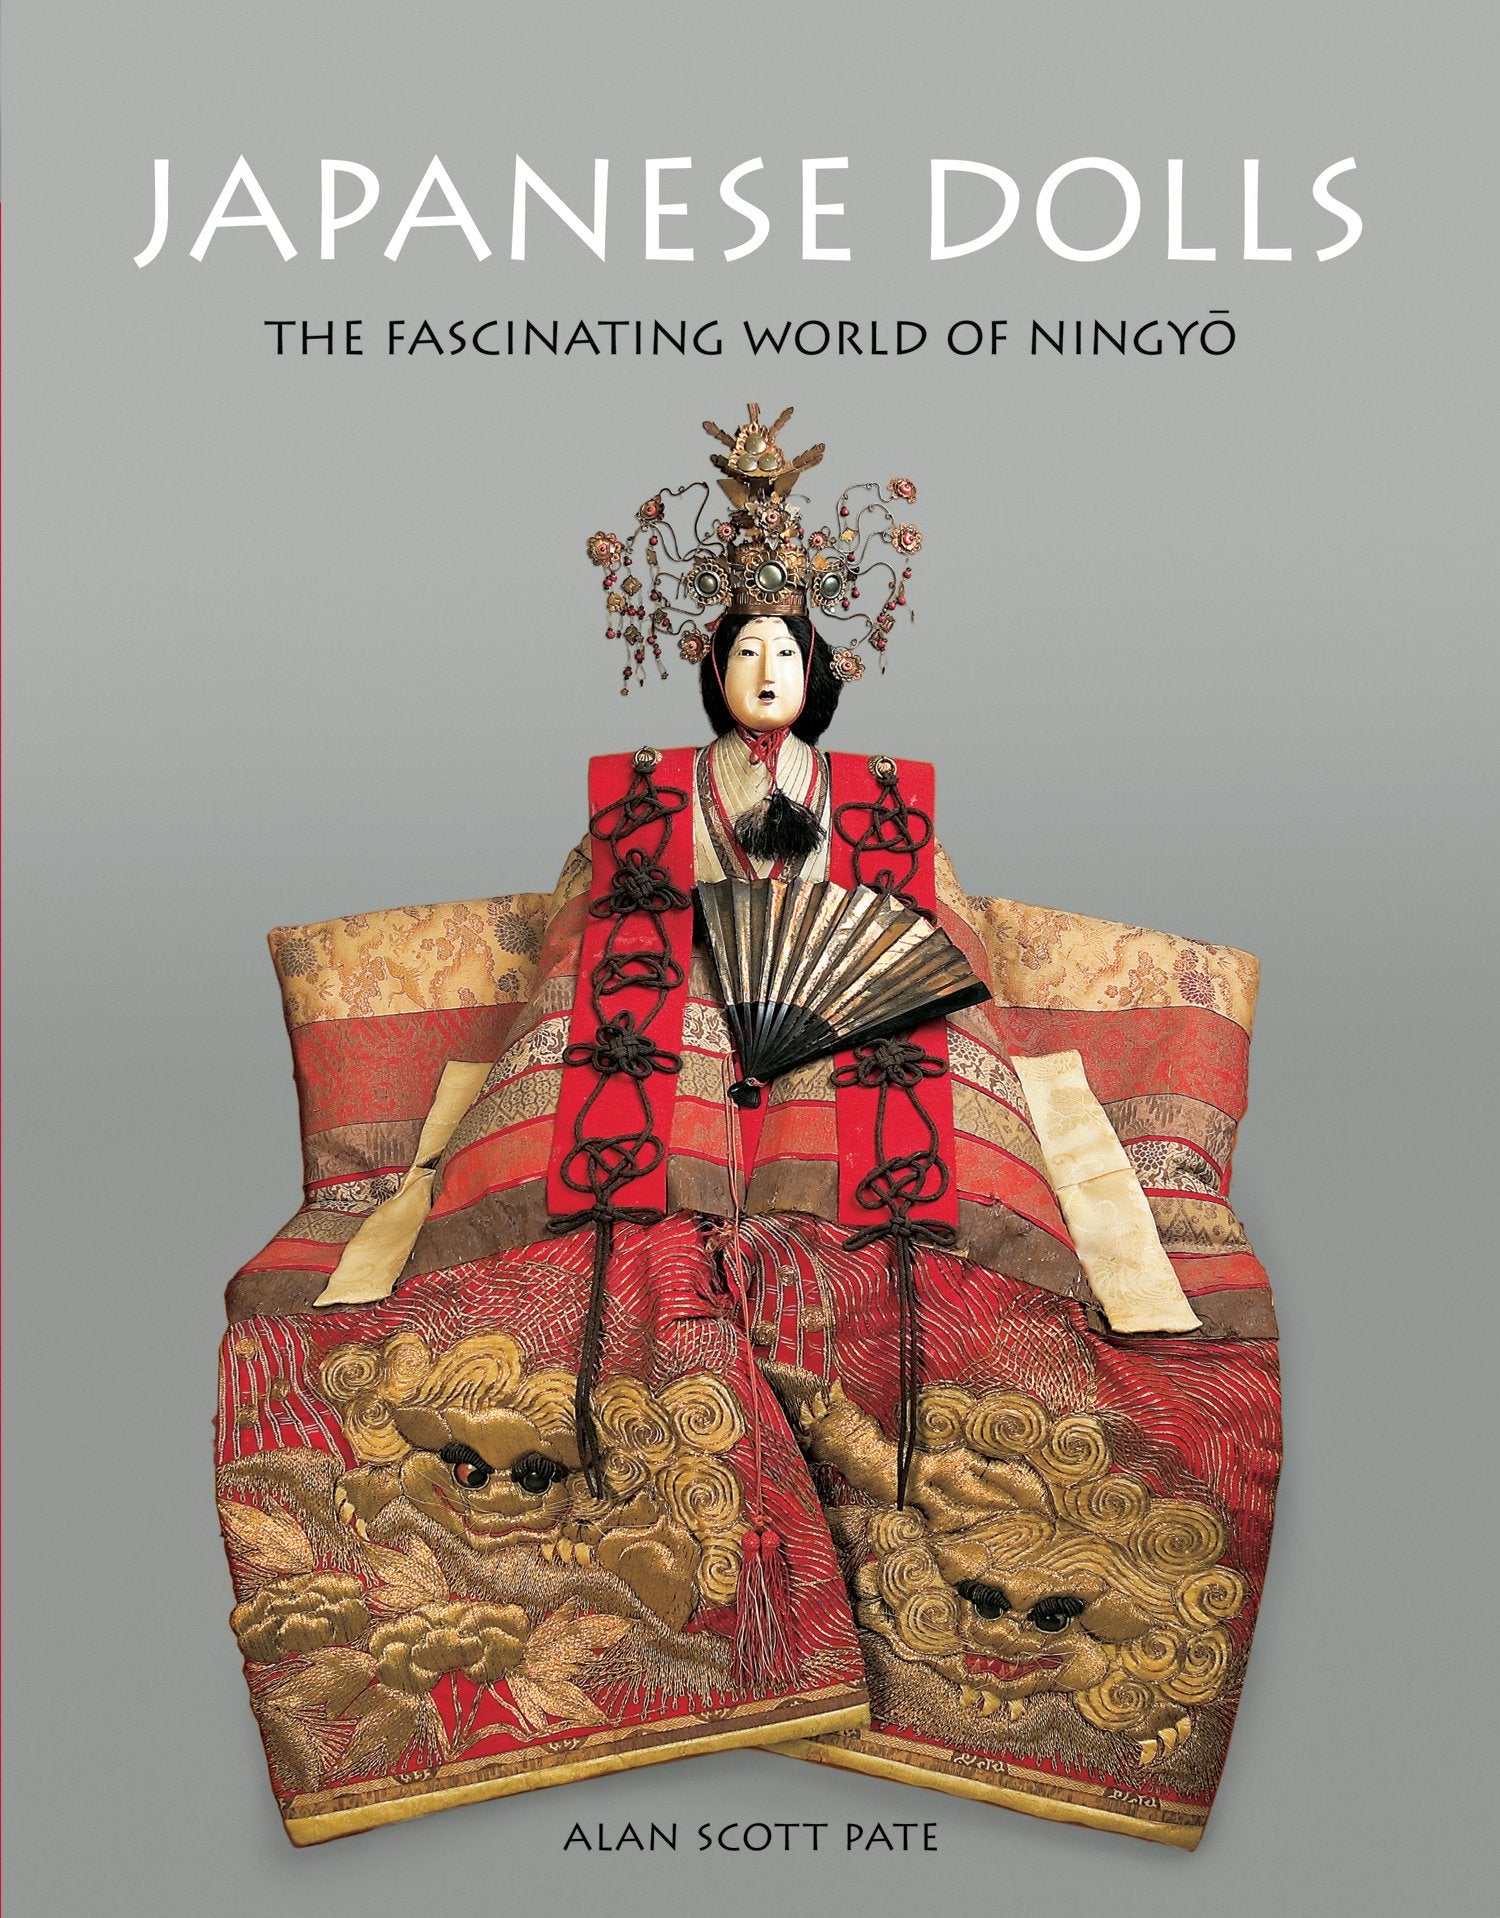 Japanese Dolls: The Fascinating World of Ningyô by Alan Scott Pate